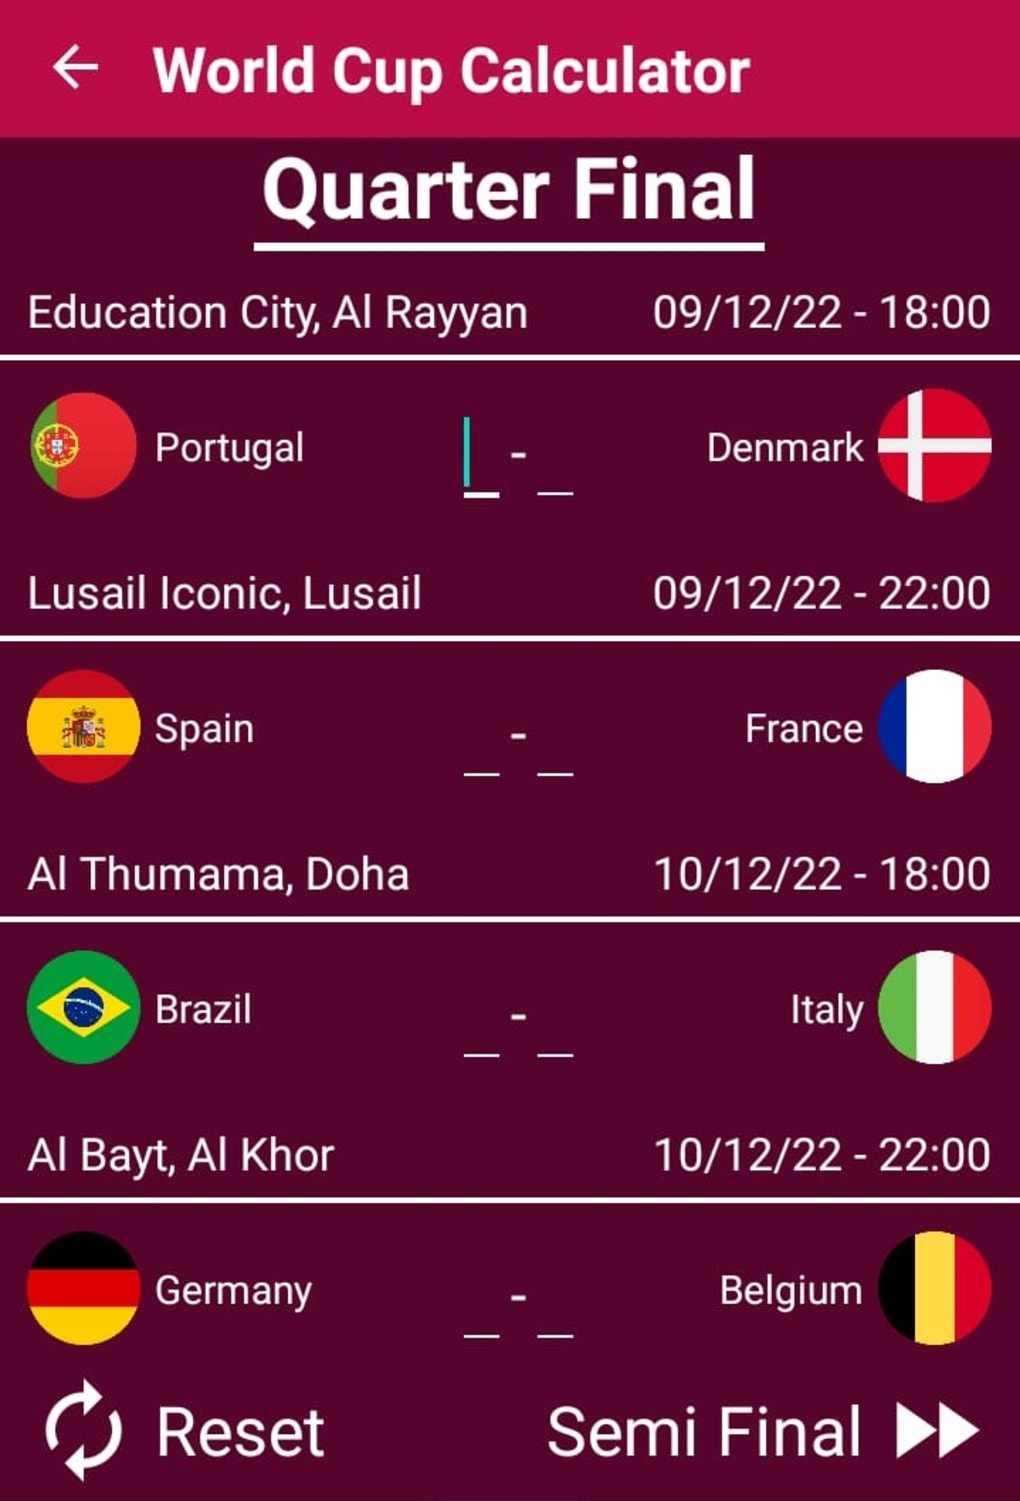 World Cup 2022 - Bracket - Calculator Qatar for Android